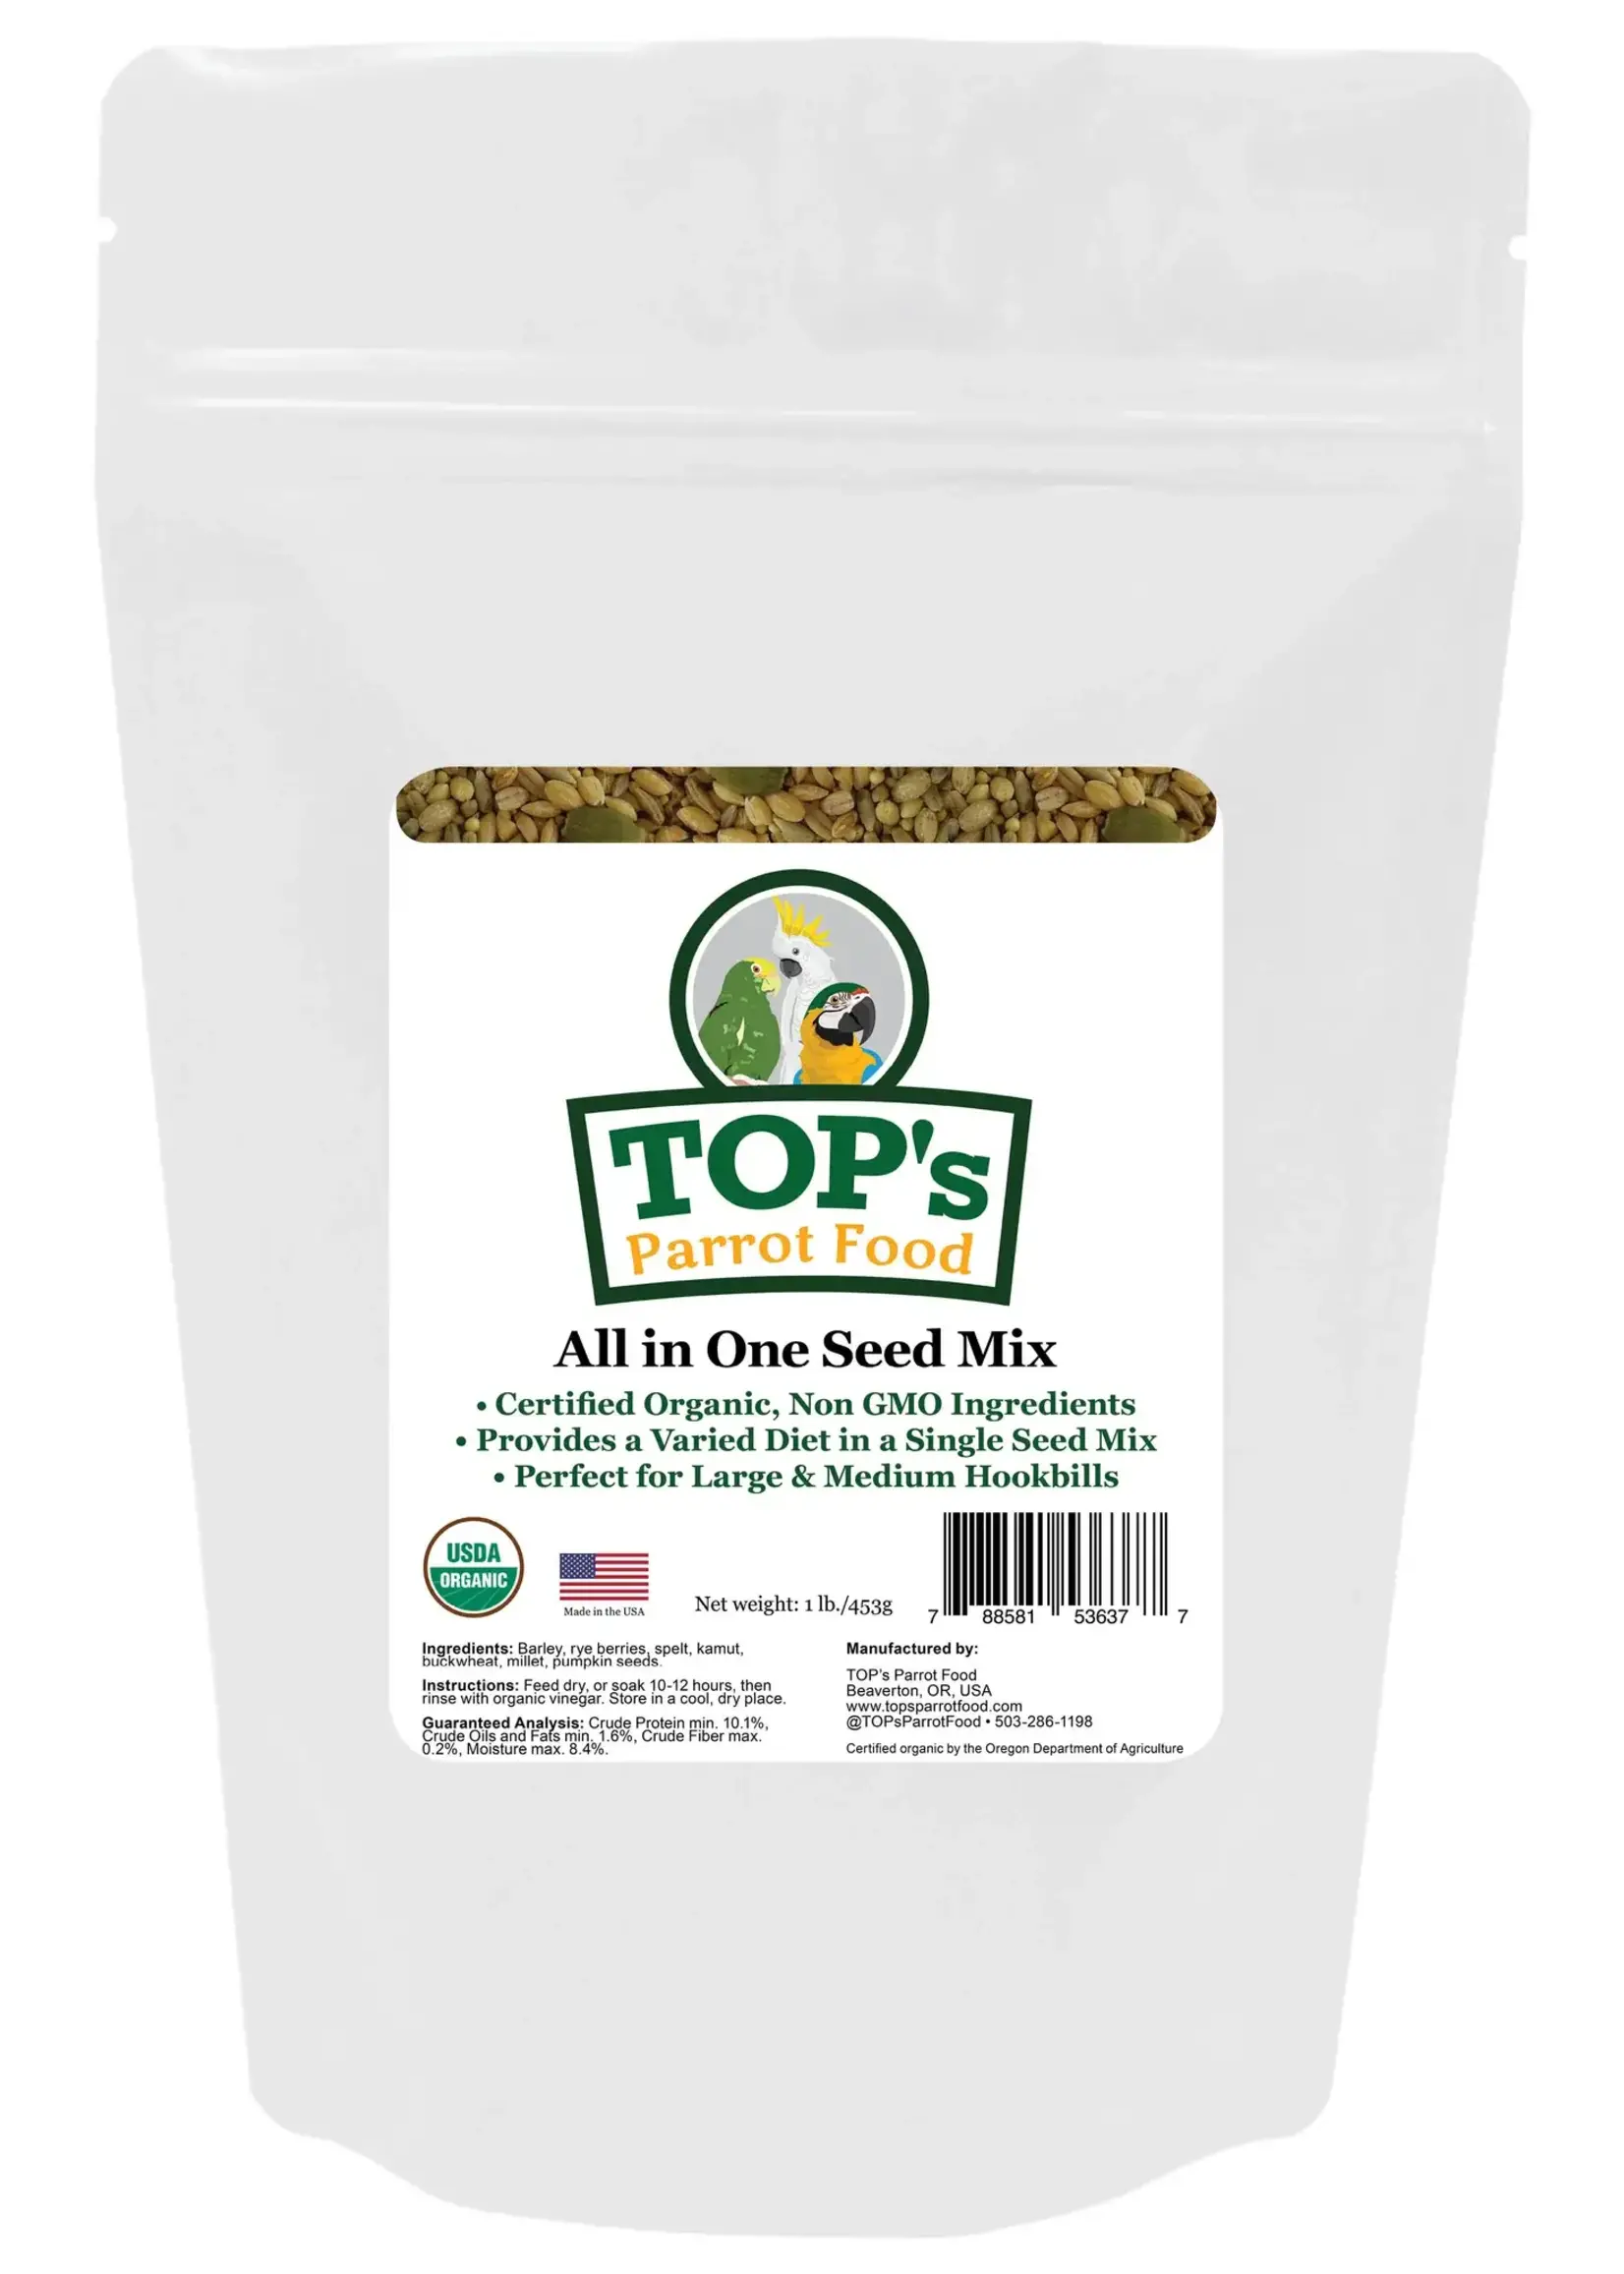 Totally Organics TOPS TOP's All-in-One Seed Mix